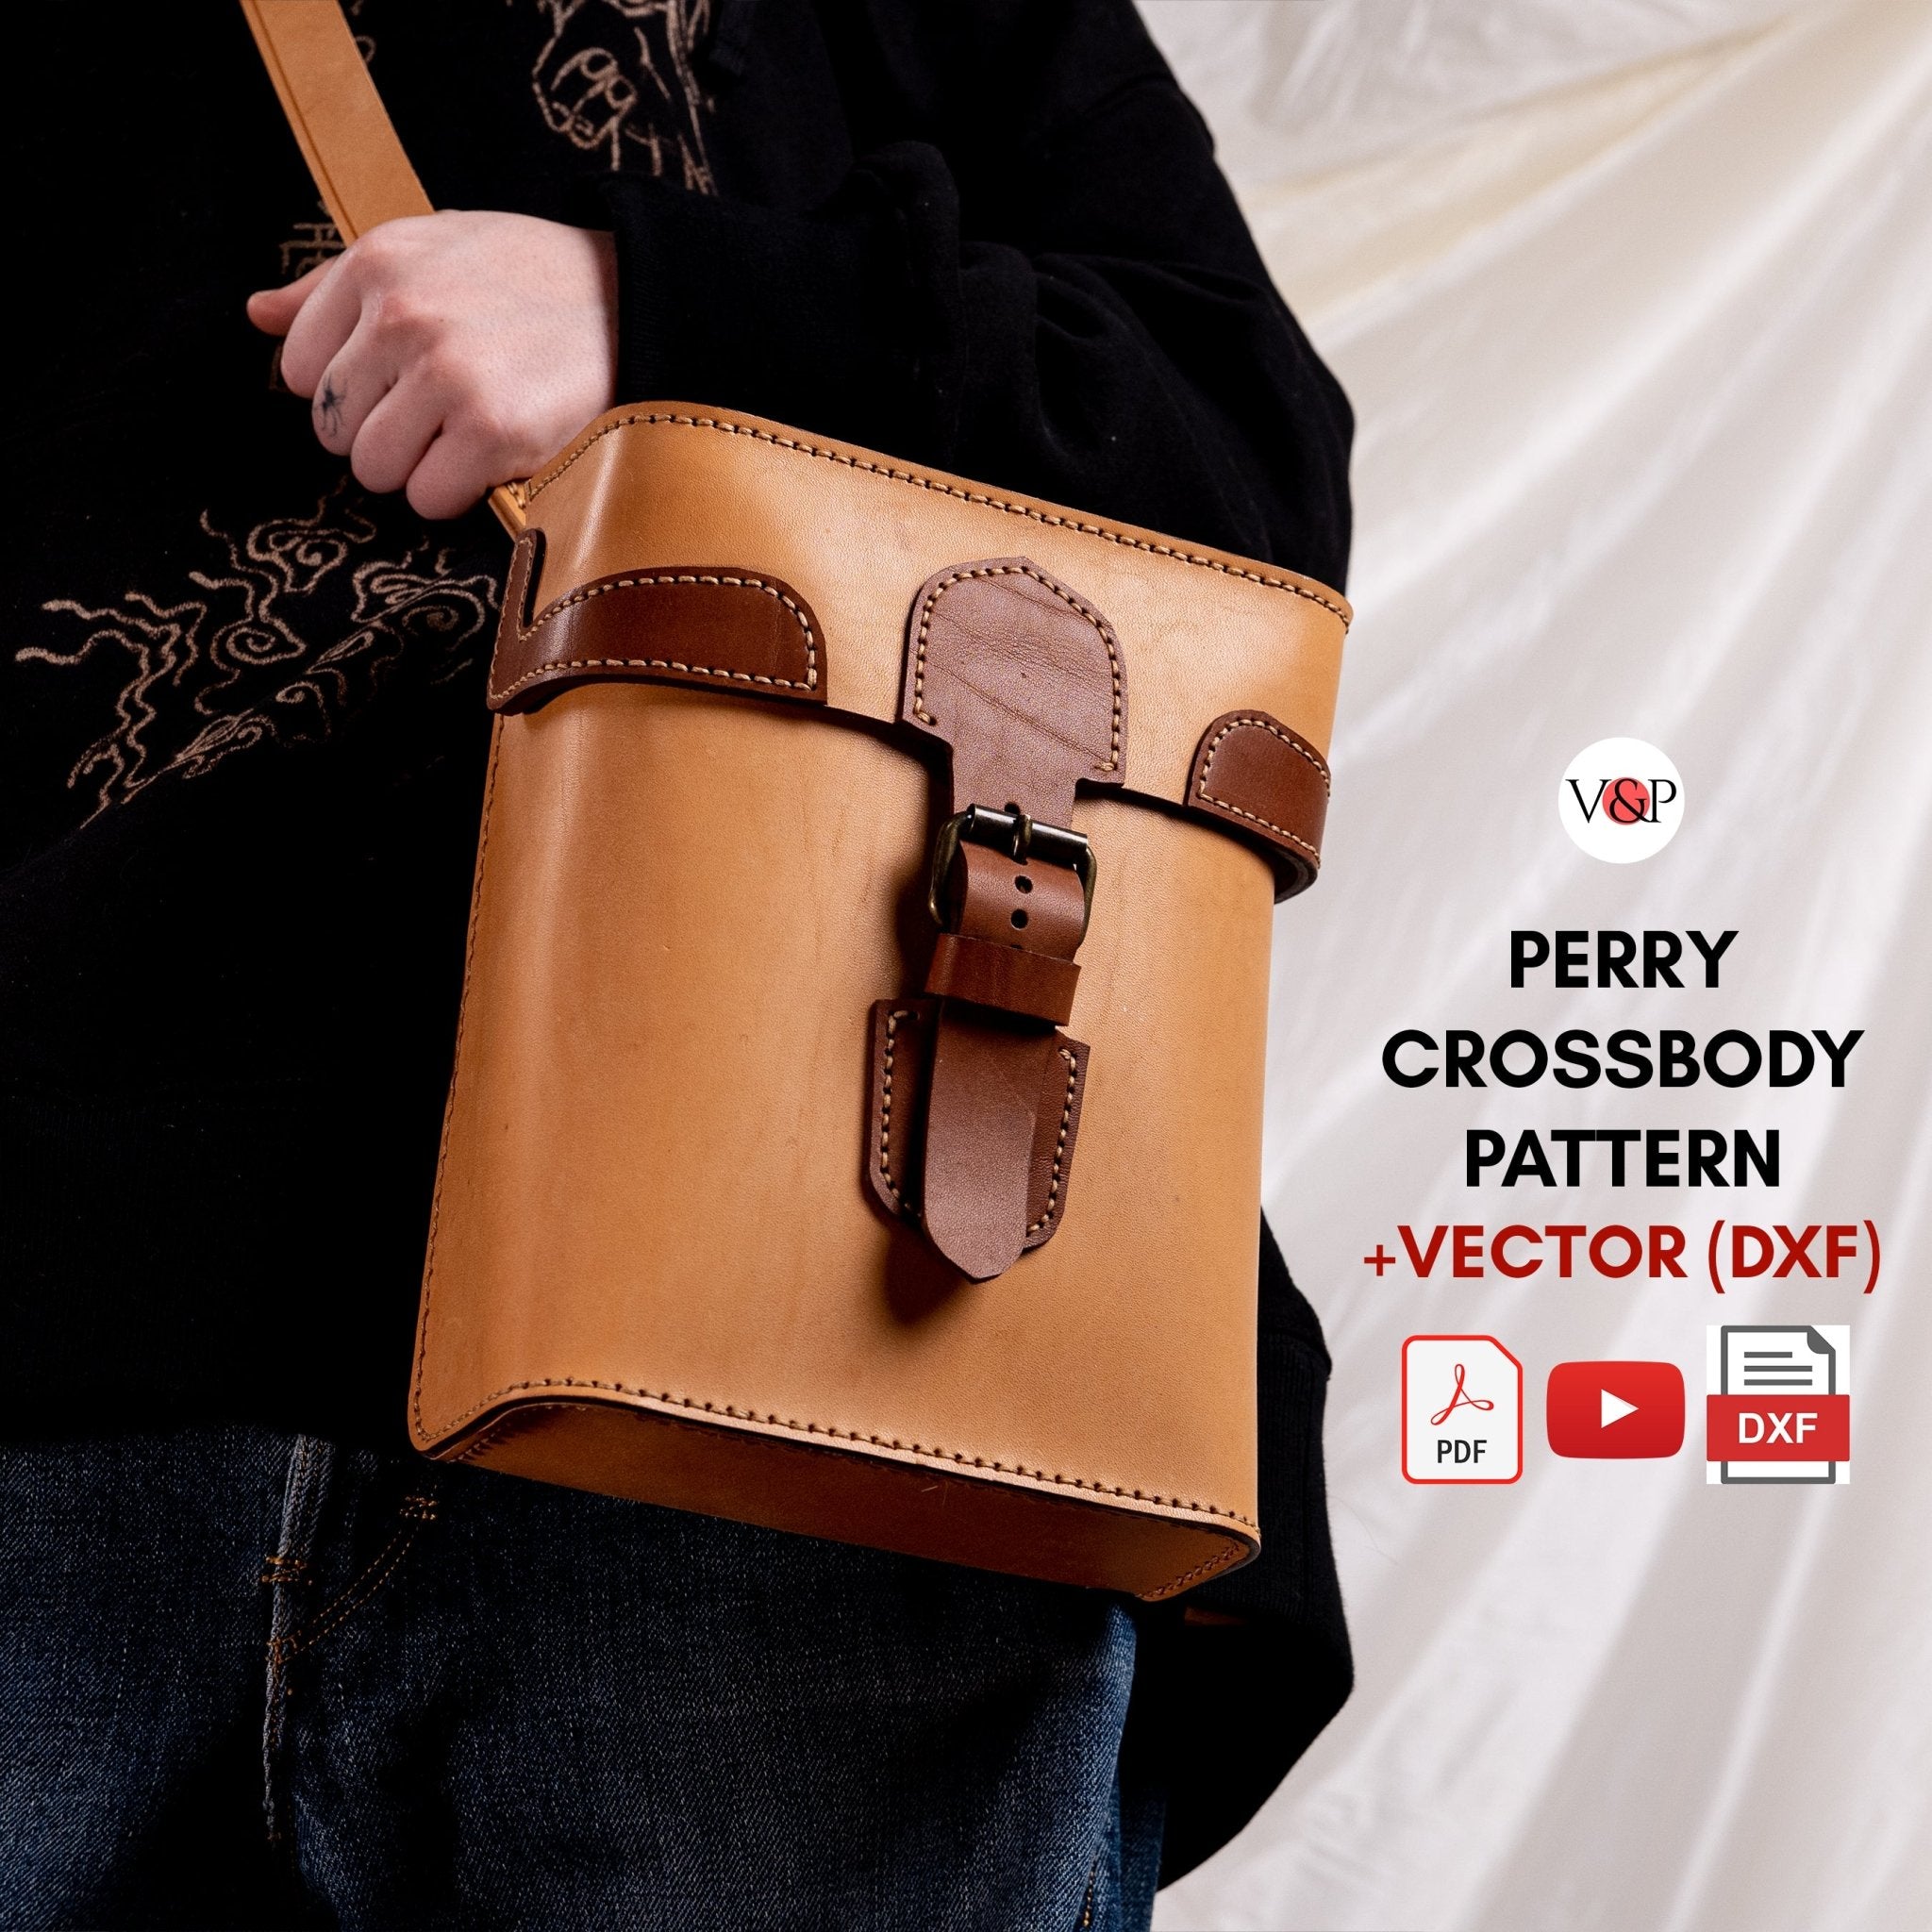 PDF Pattern, Vector DXF File and Instructional Video for Perry Crossbody Bag - Vasile and Pavel Leather Patterns